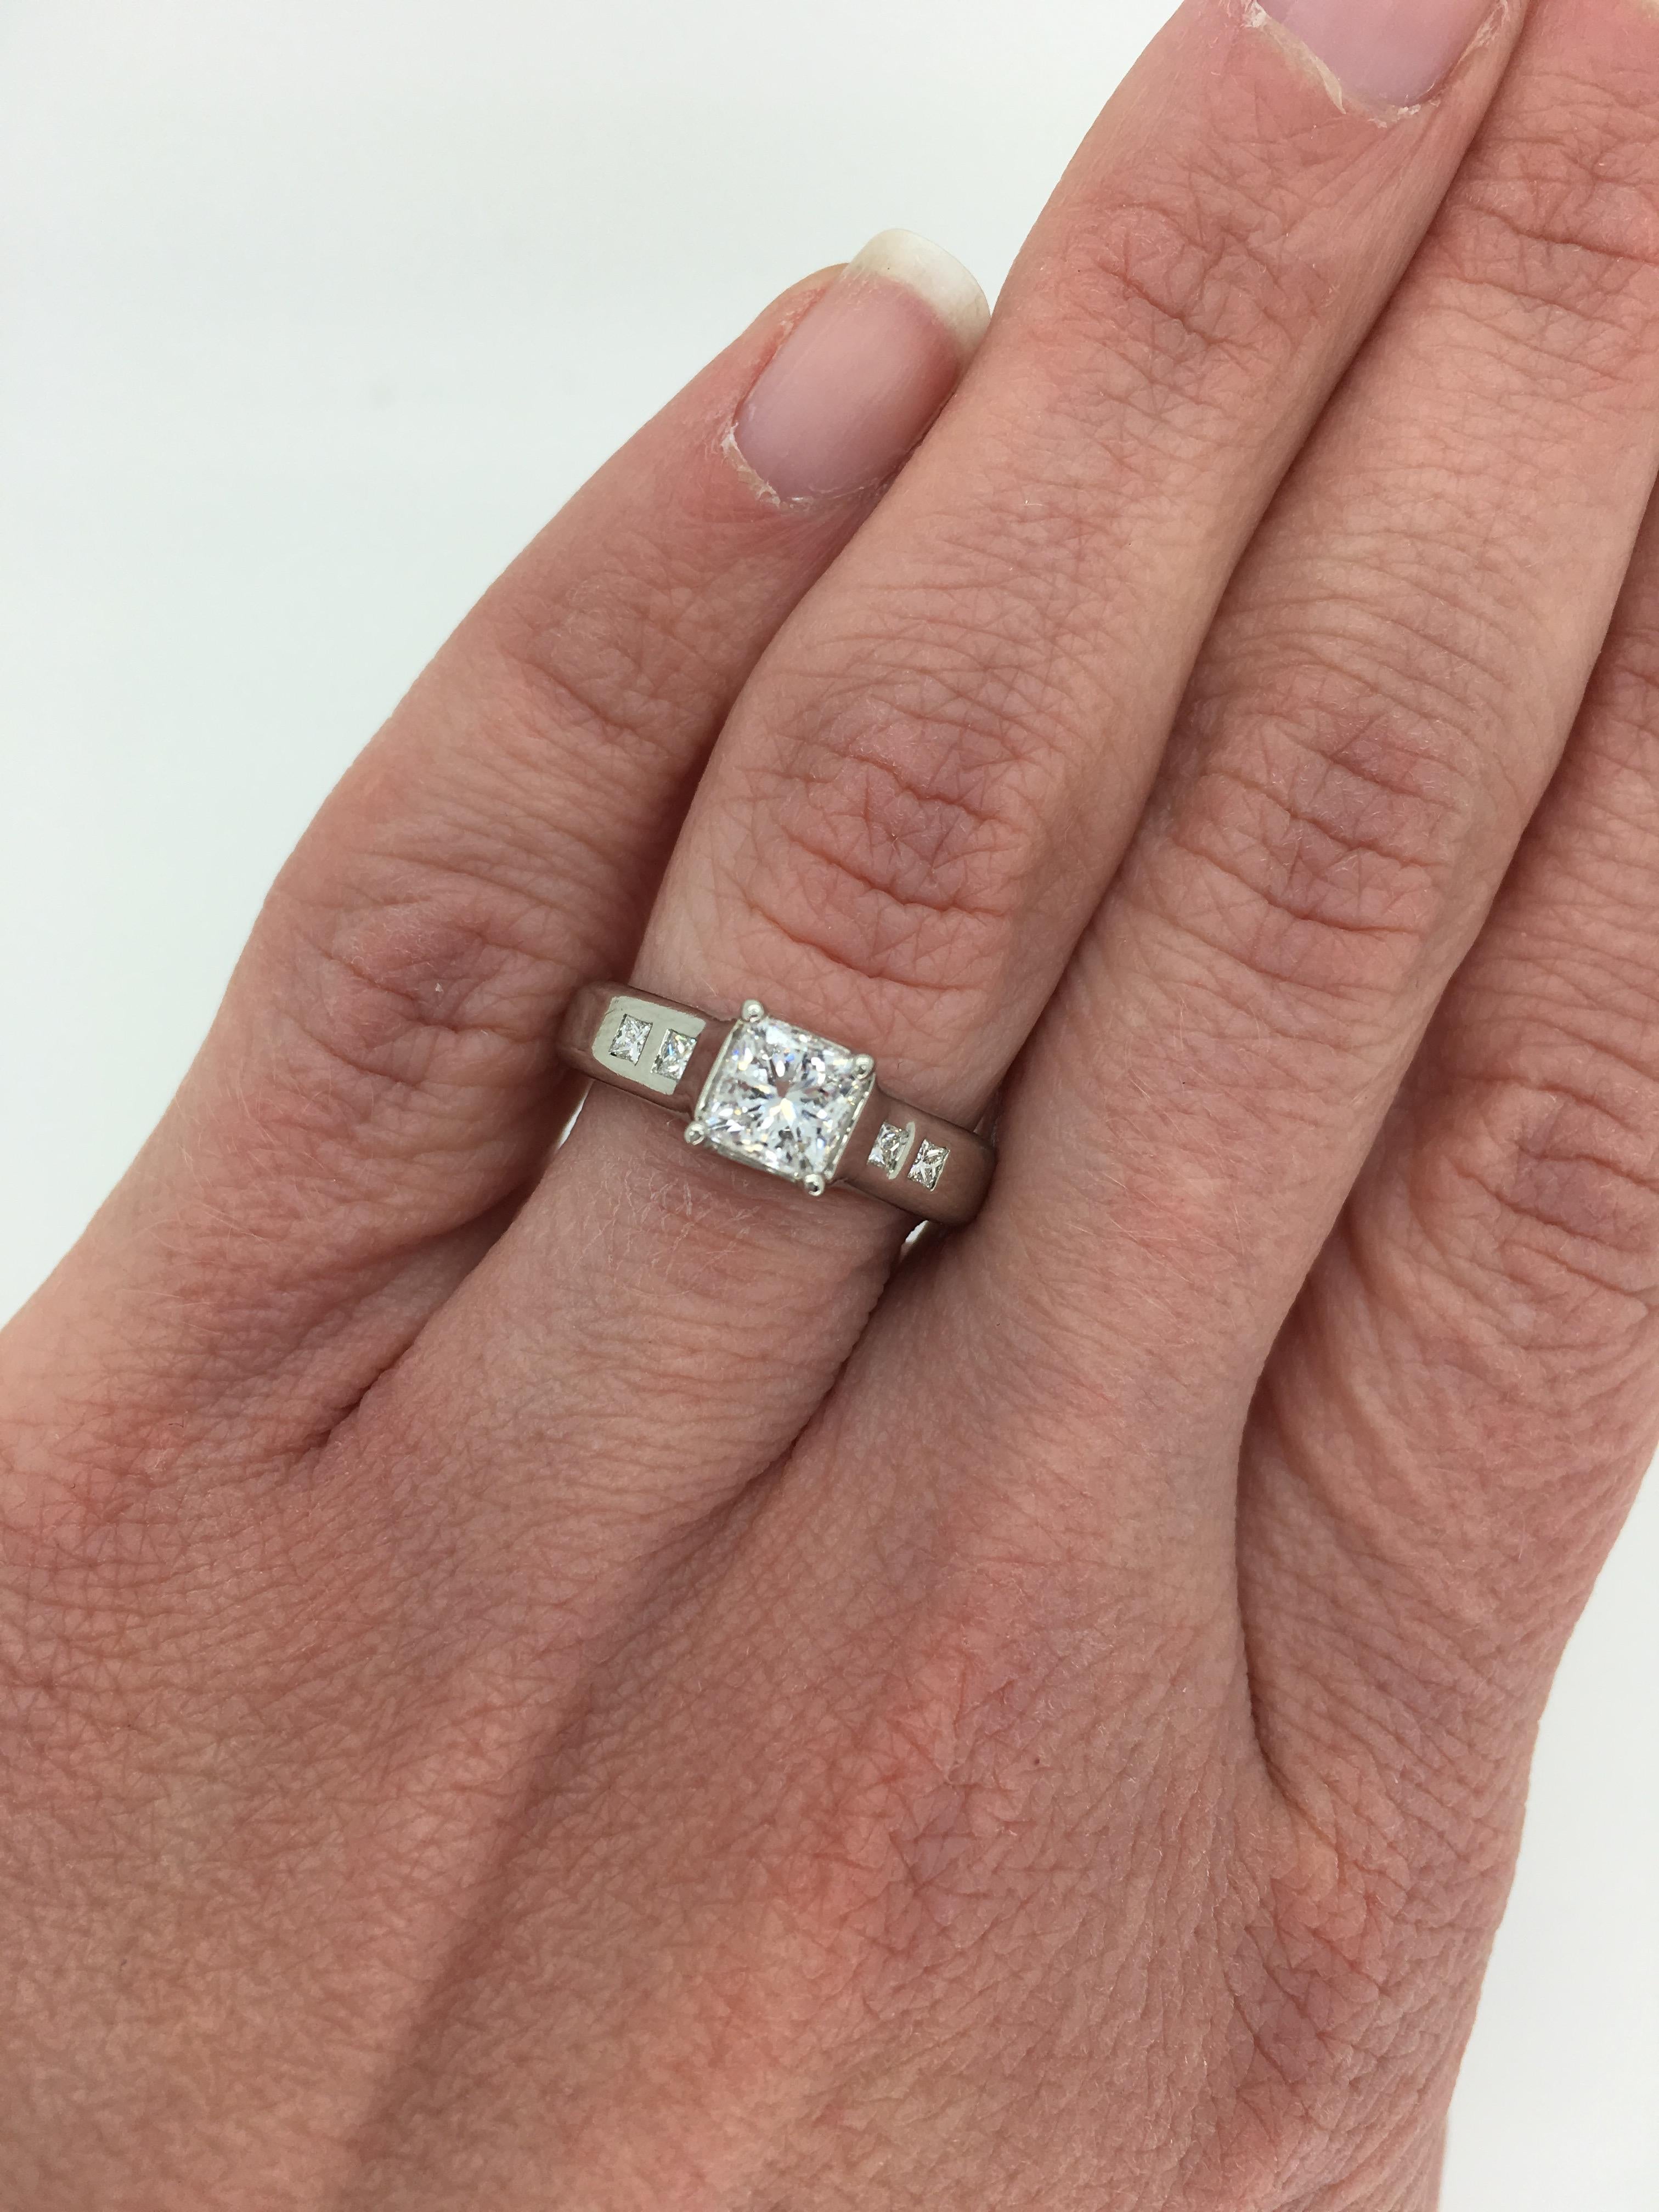 “Eden Engagement Ring” from designer Jeff Cooper’s “Ever Collection”.  The Platinum ring features a beautiful AGS Certified .82CT Princess Cut Diamond. The featured diamond displays E-F color and SI1 clarity. There are four additional Princess Cut